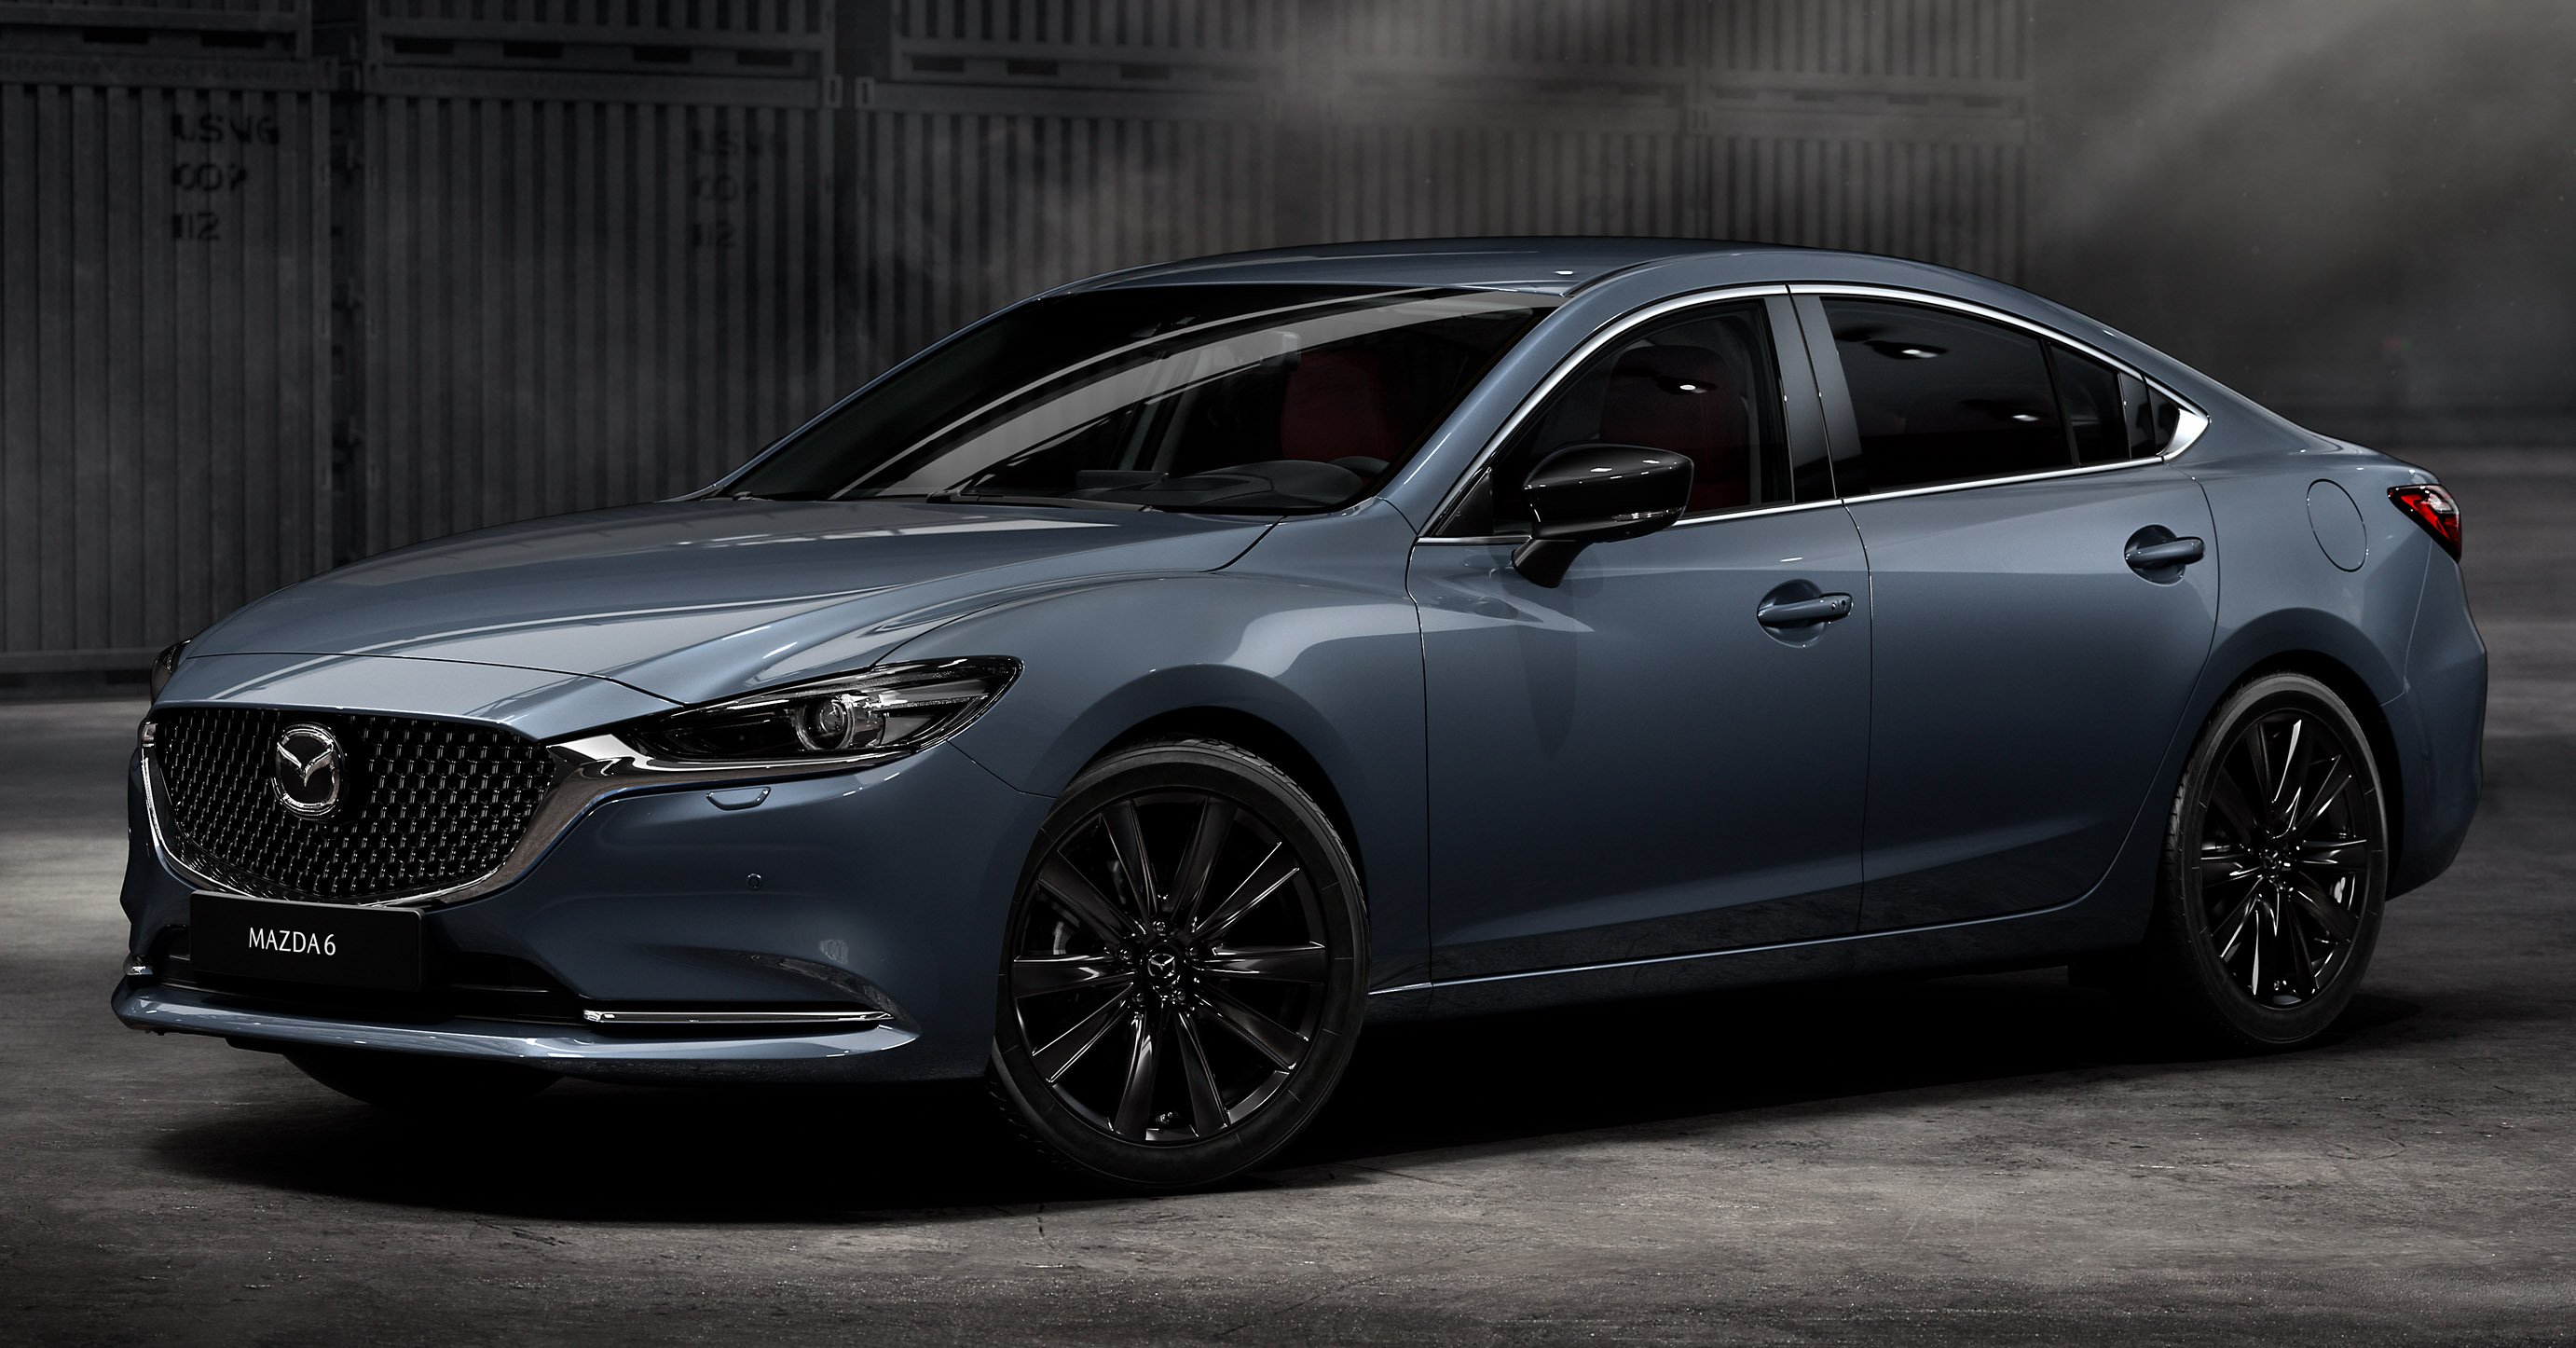 2021 mazda 6 updated in malaysia - 2.0l and 2.5l petrol variants